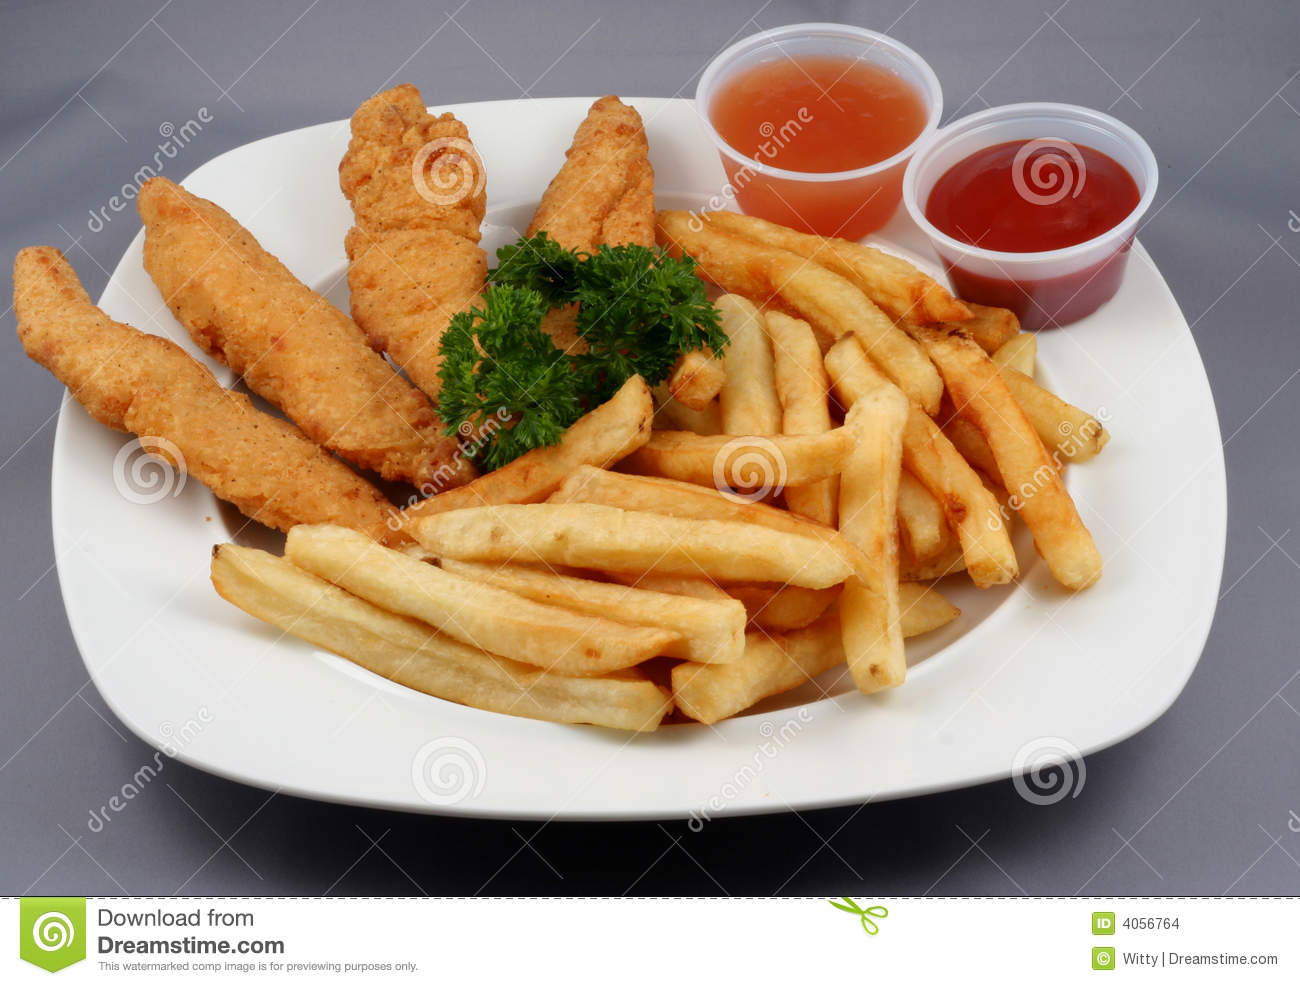 Chicken Fingers And French Fries With Ketchup And A Dipping Sauce